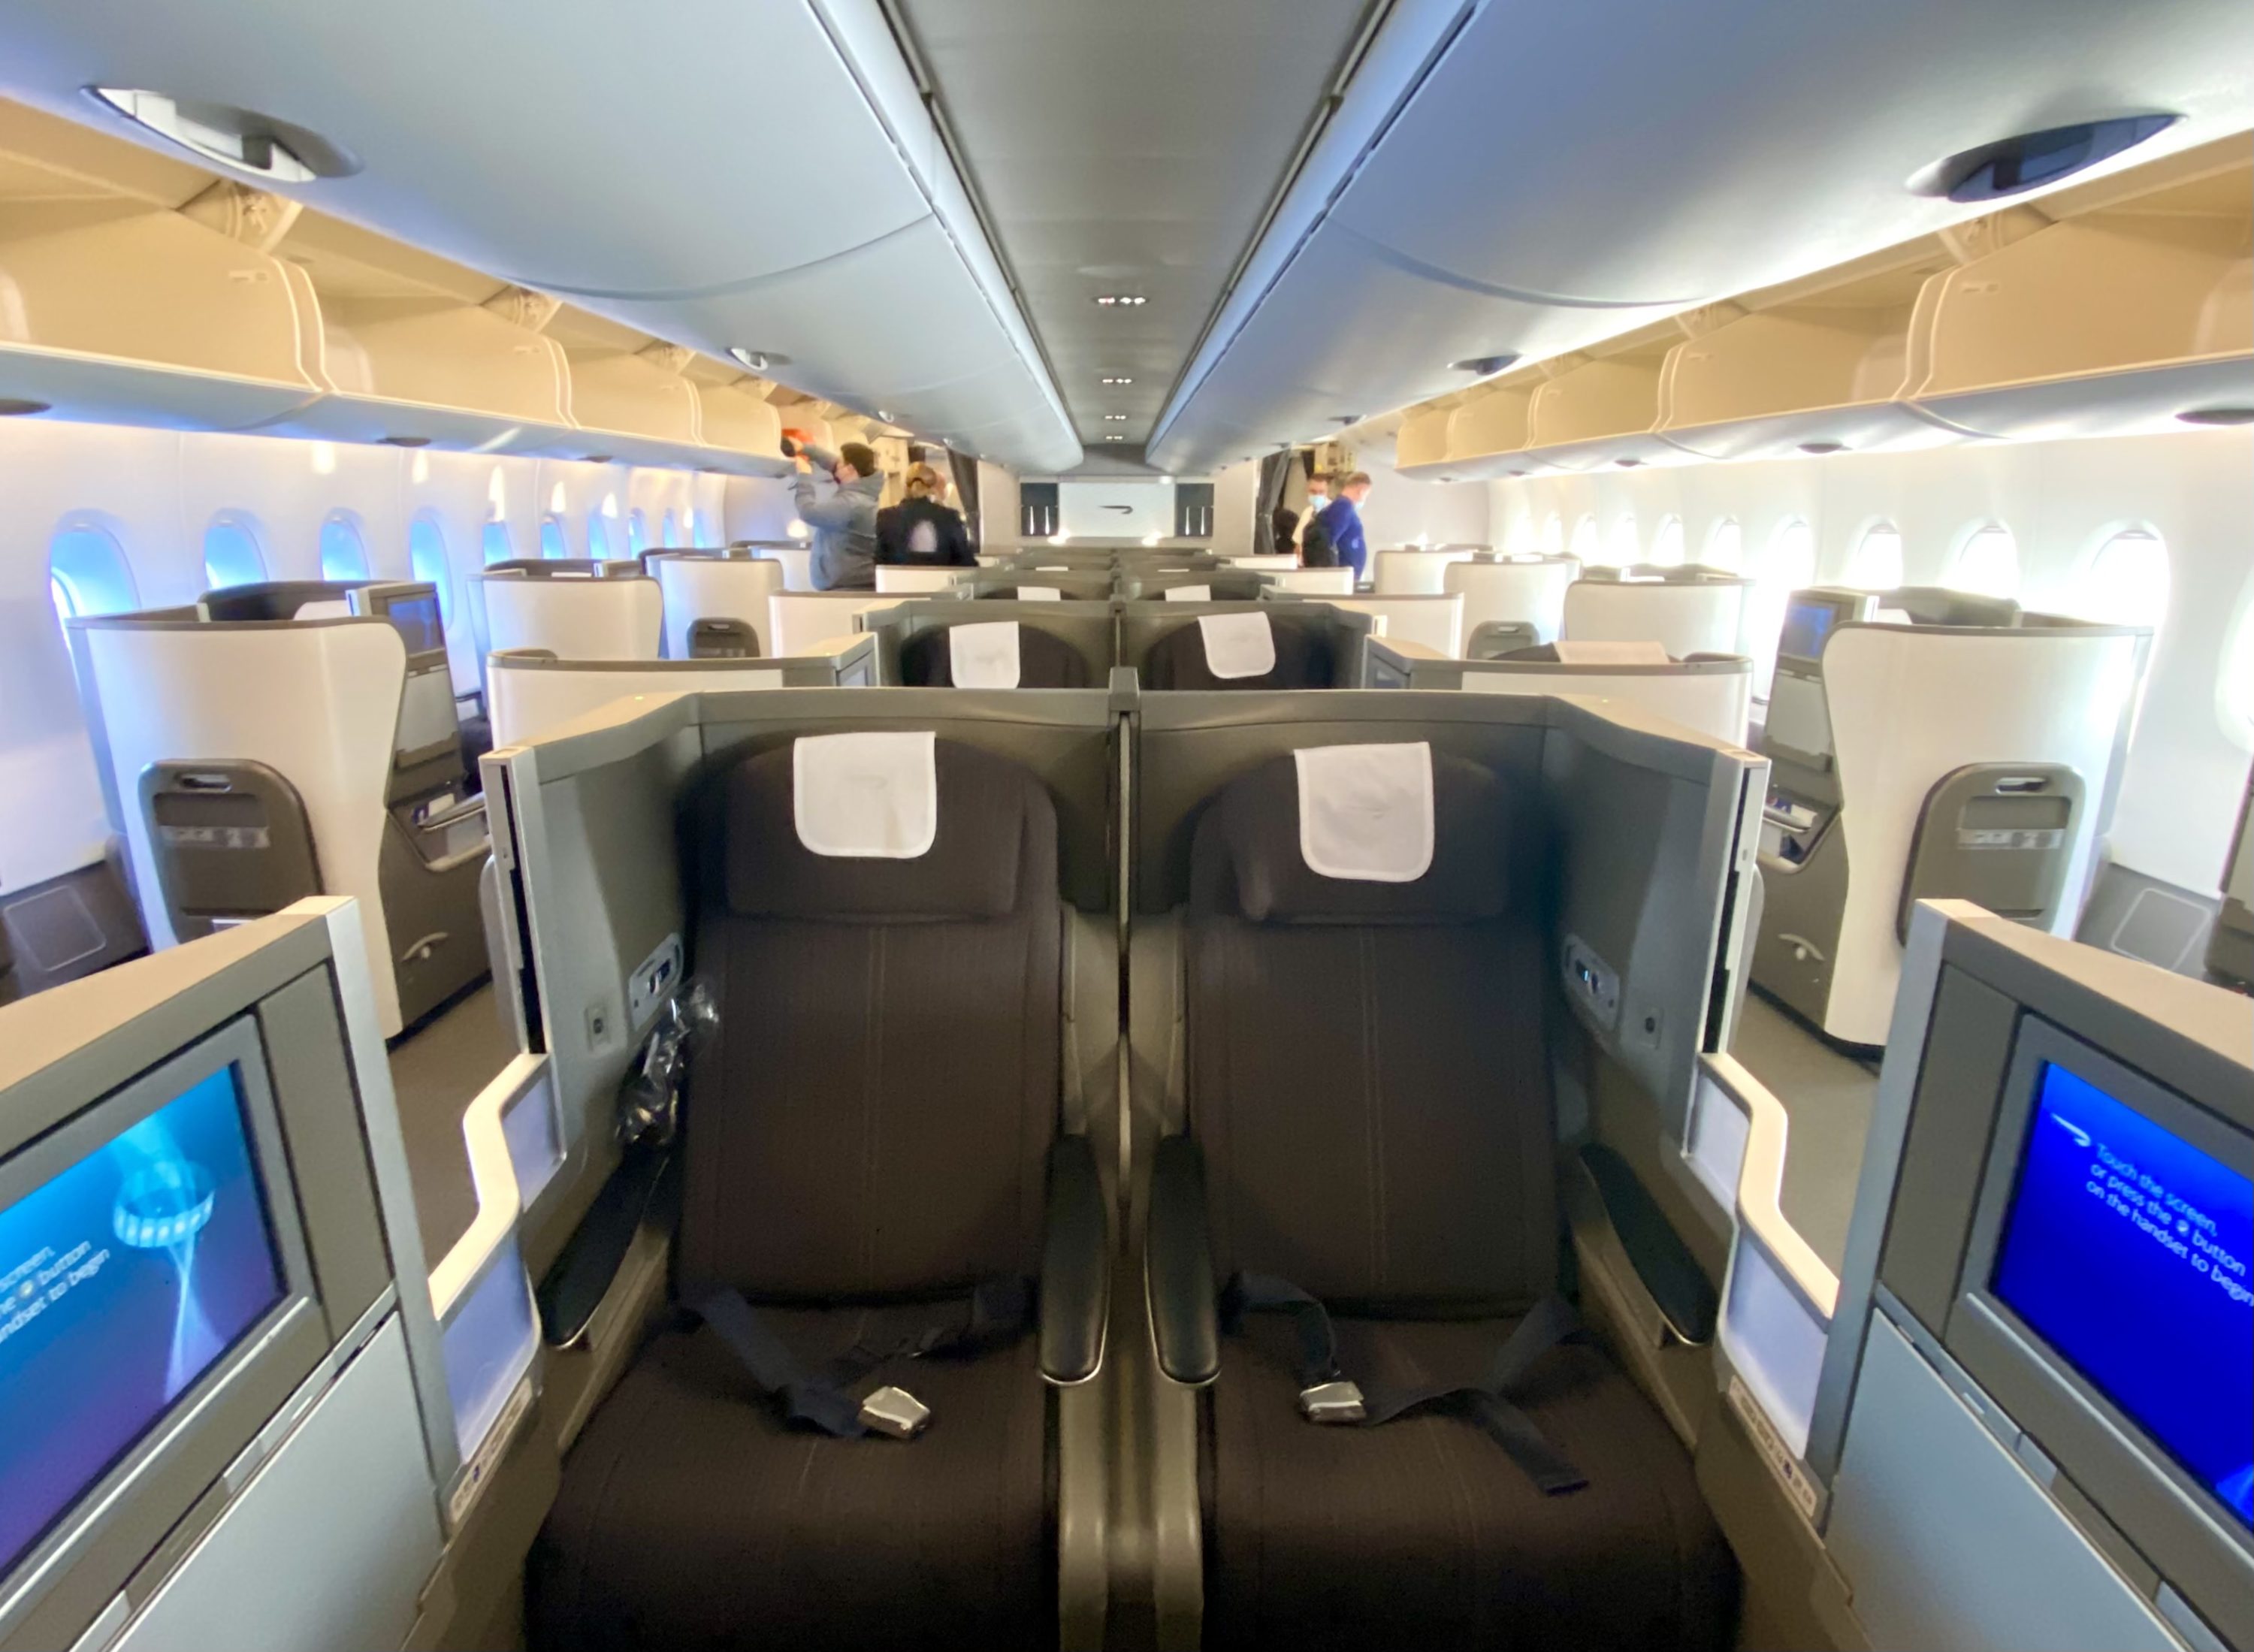 British Airways Club Europe A380 Club World lower deck cabin from the back